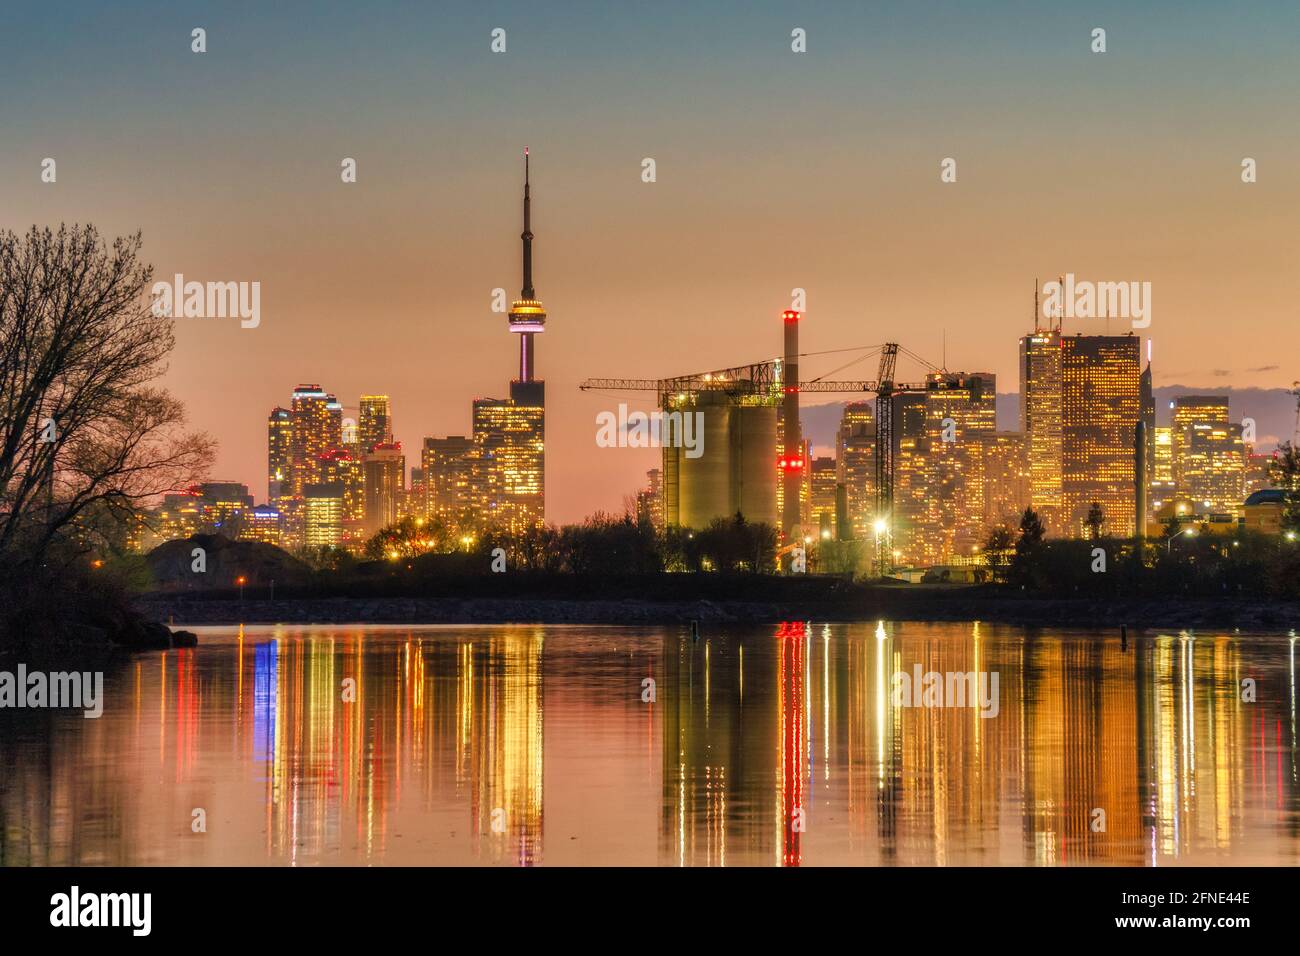 Beautiful Toronto waterfront skyline with landmark buildings such as CN Tower in downtown and Hearn Generating Station in Port Lands in golden hour at Stock Photo